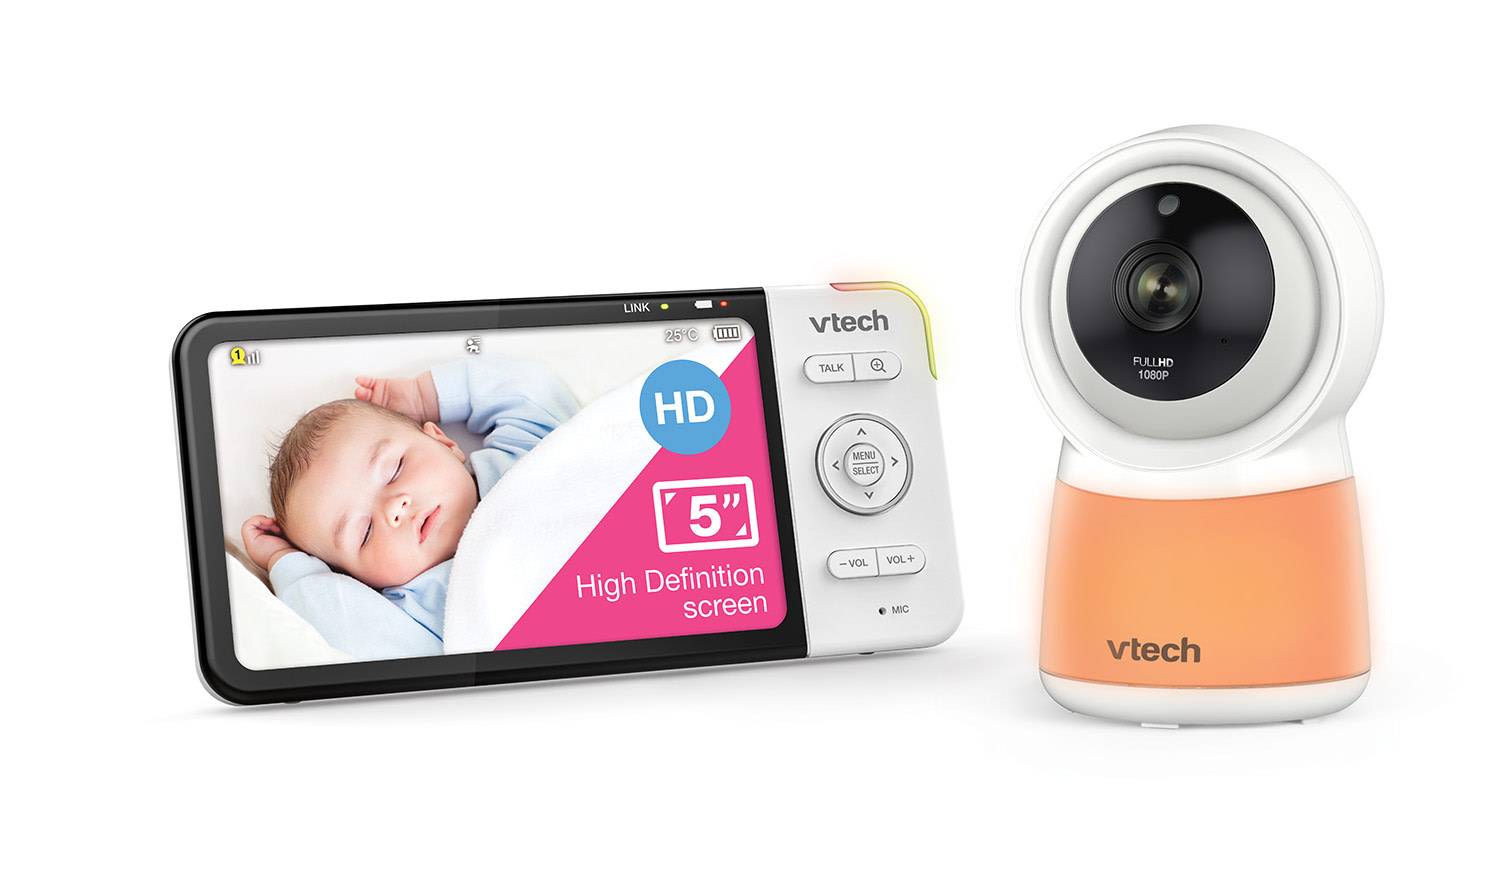 VTech Vtech RM5754HDV2 HD Video Monitor with Remote Access